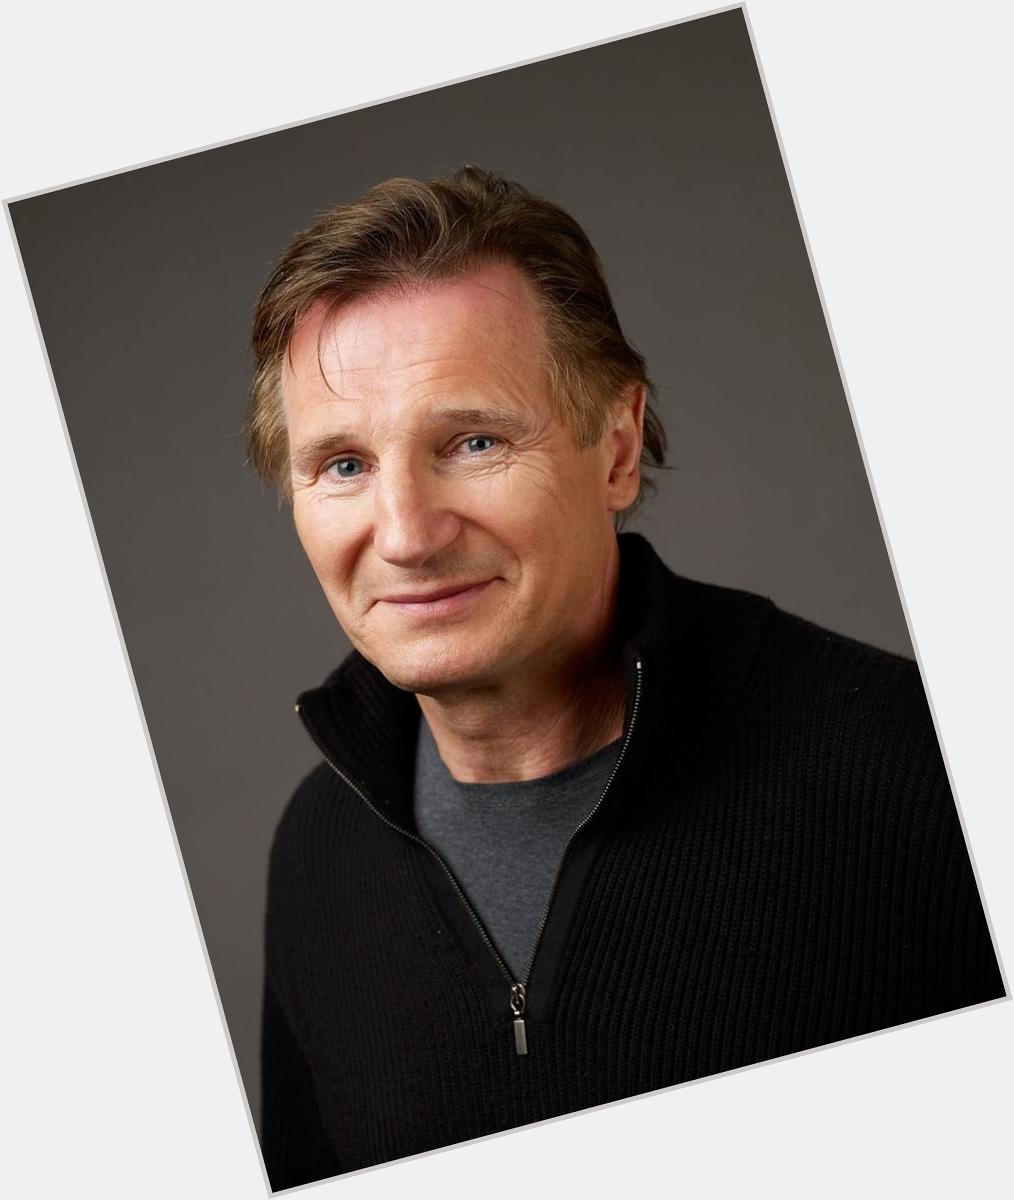 Happy Birthday Liam Neeson!
May the Force be with you! 